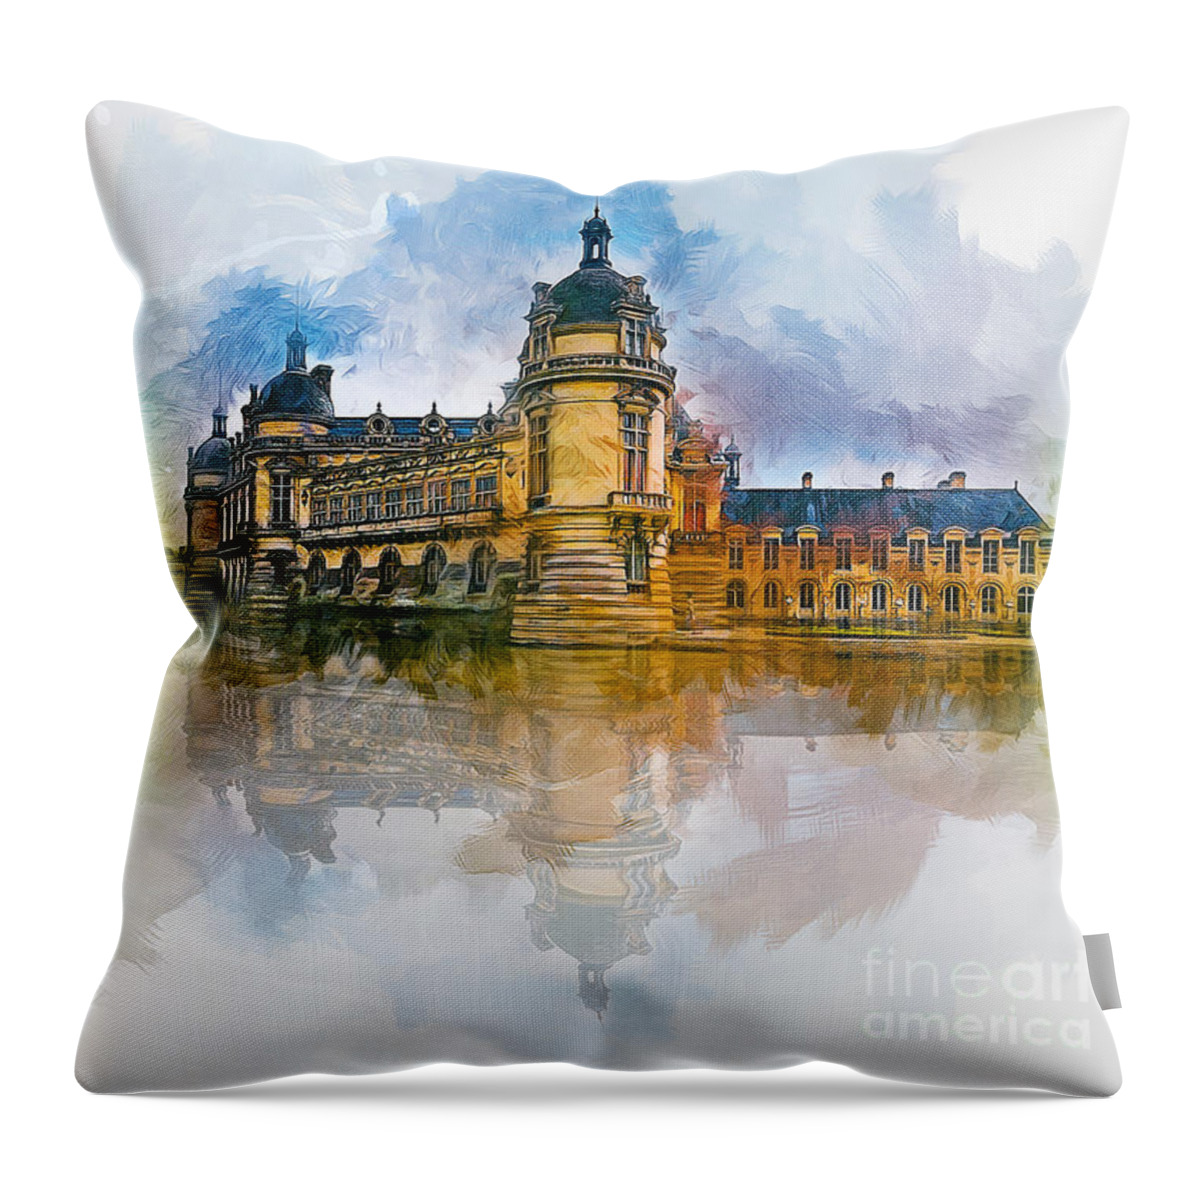 Castle Throw Pillow featuring the painting Chateau de Chantilly by Ian Mitchell